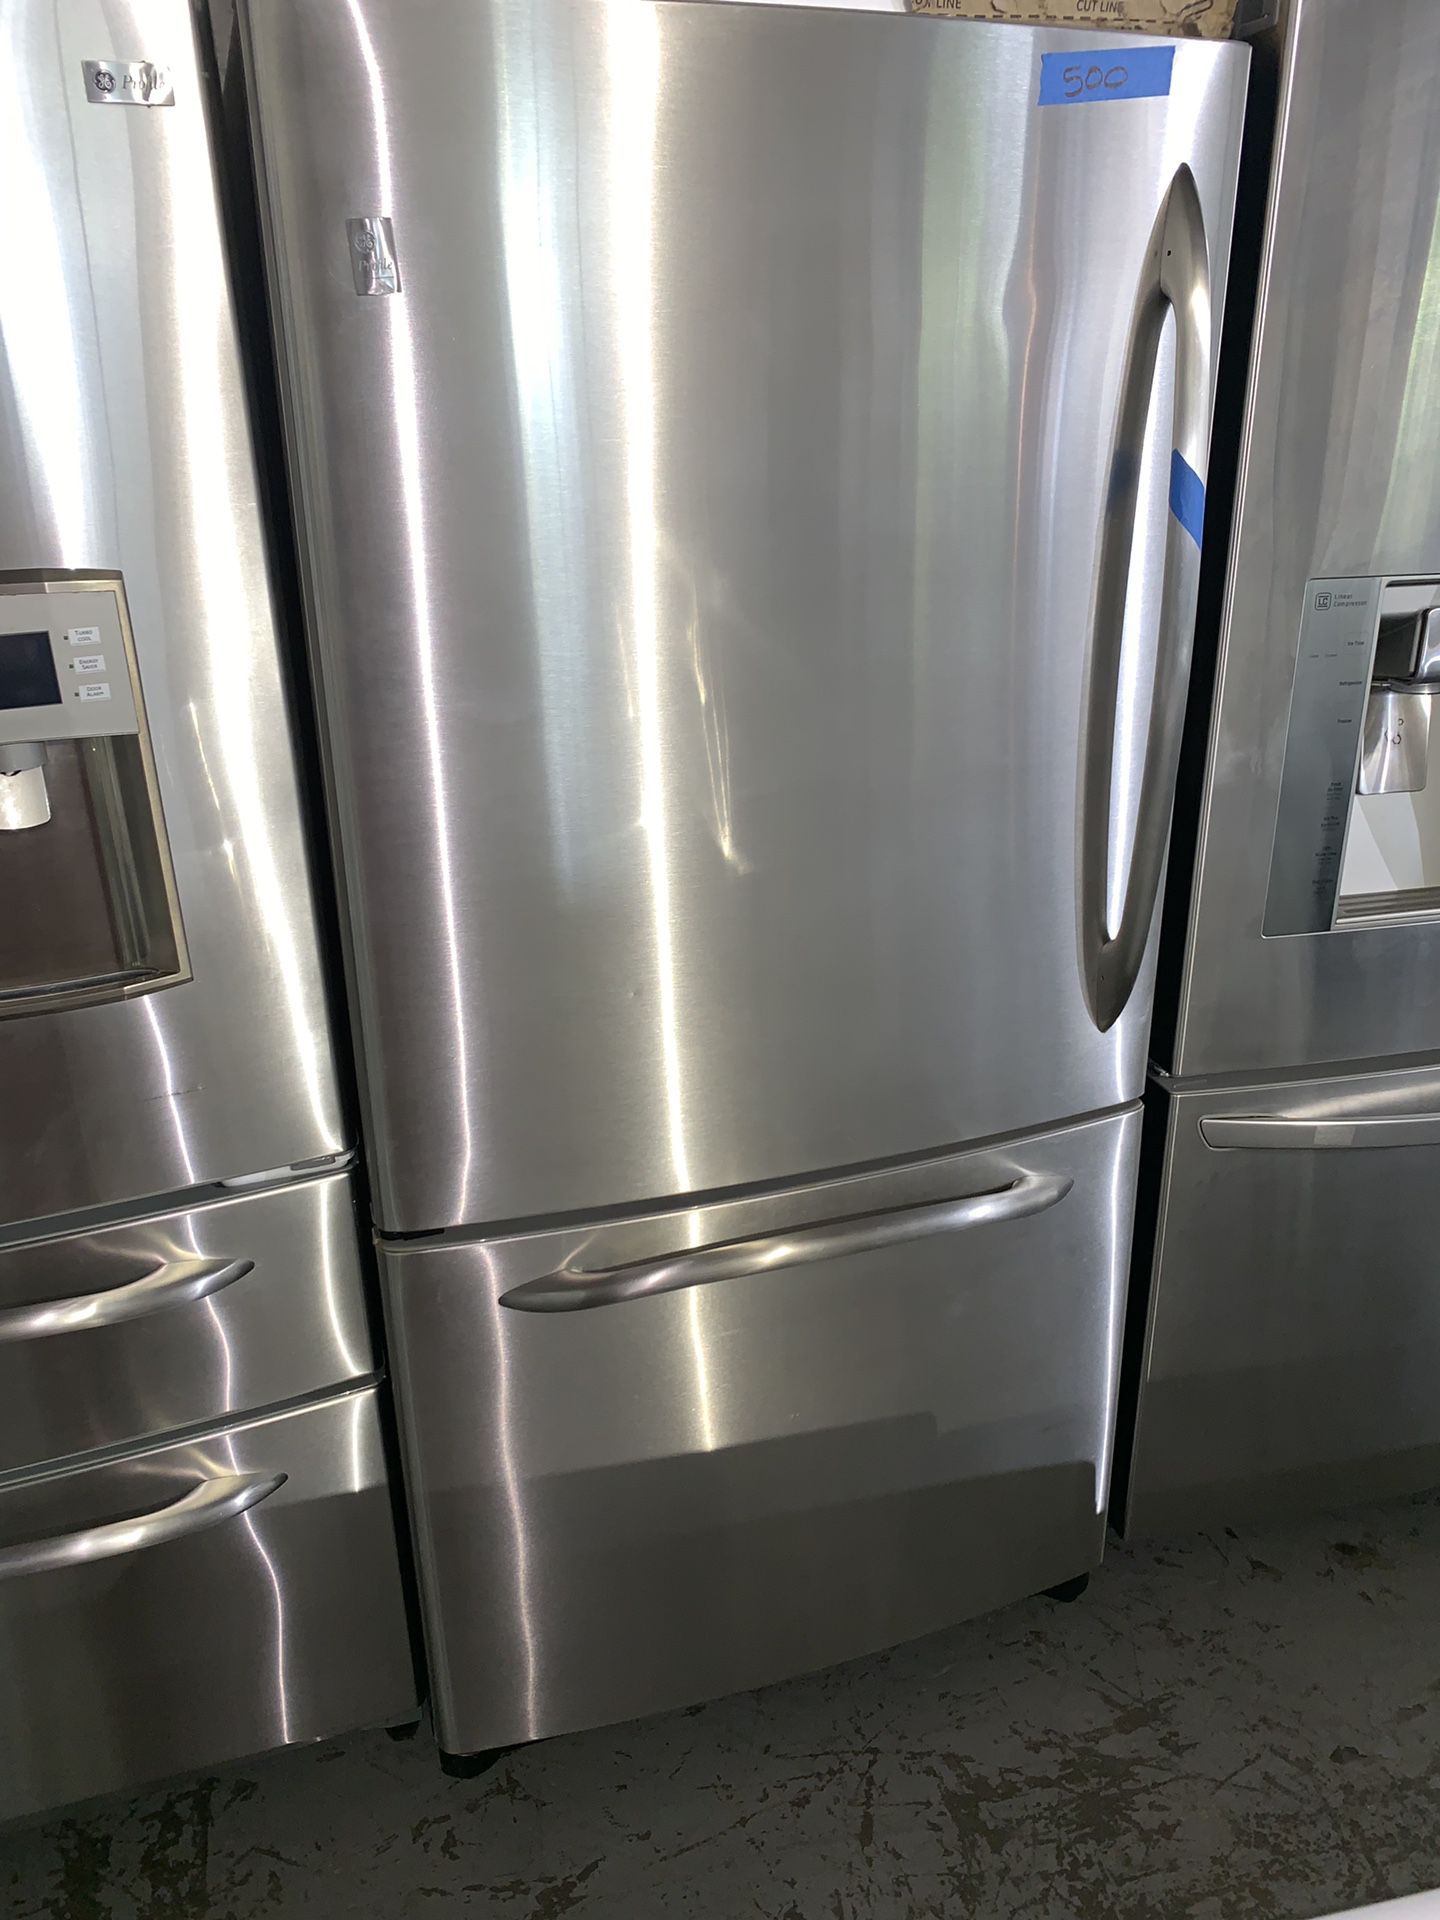 GE stainless steel bottom freezer refrigerator in excellent conditions with 4 months warranty